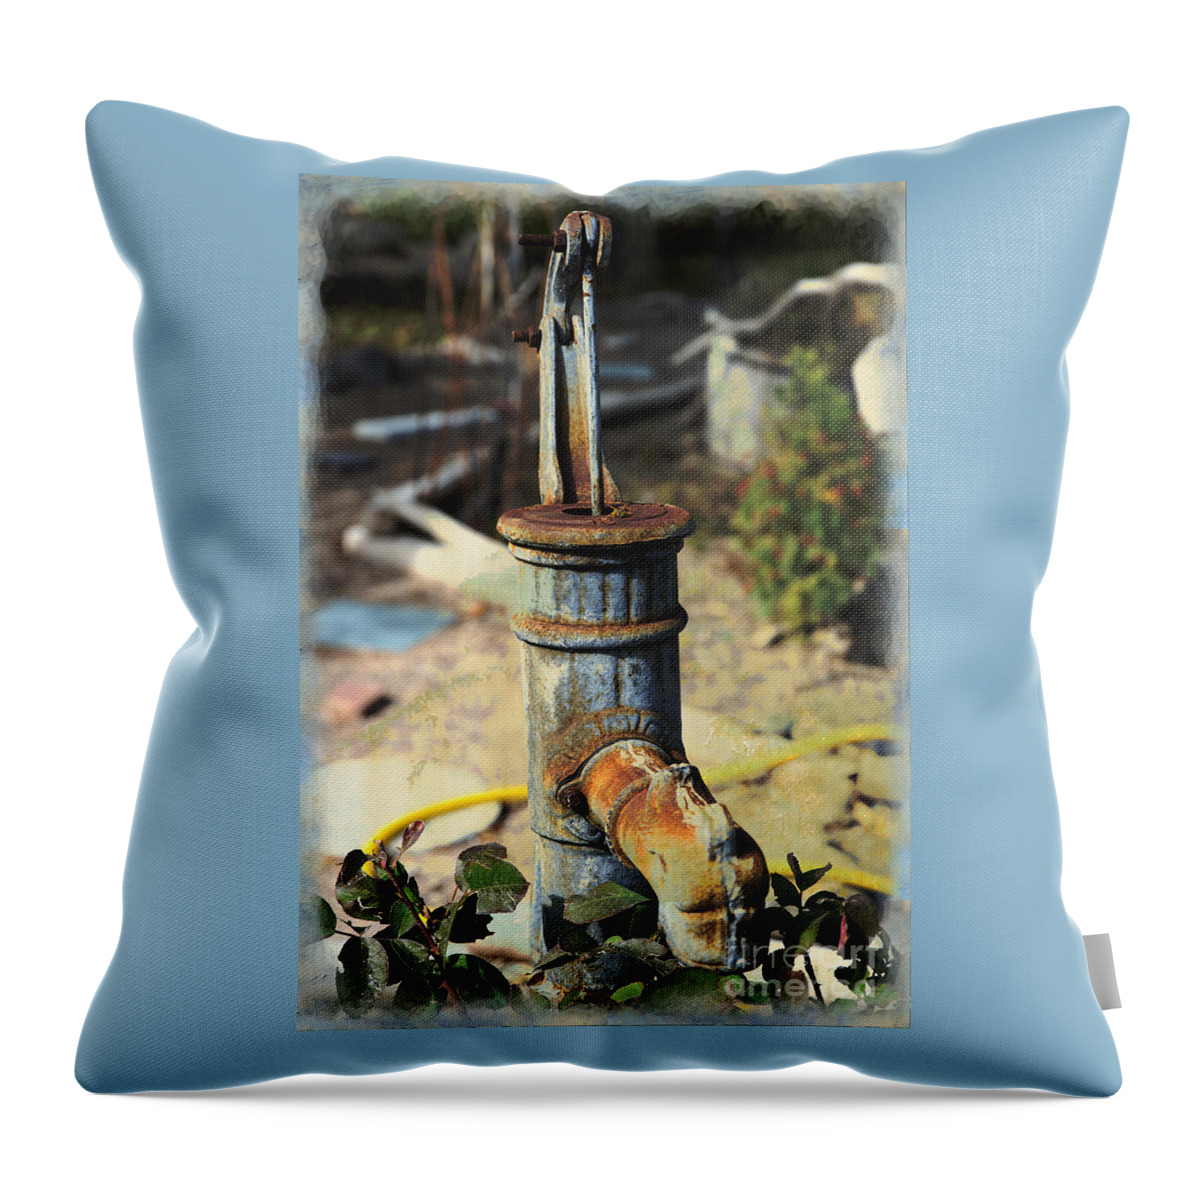 Garden Throw Pillow featuring the mixed media Old Pump in Garden by Kae Cheatham